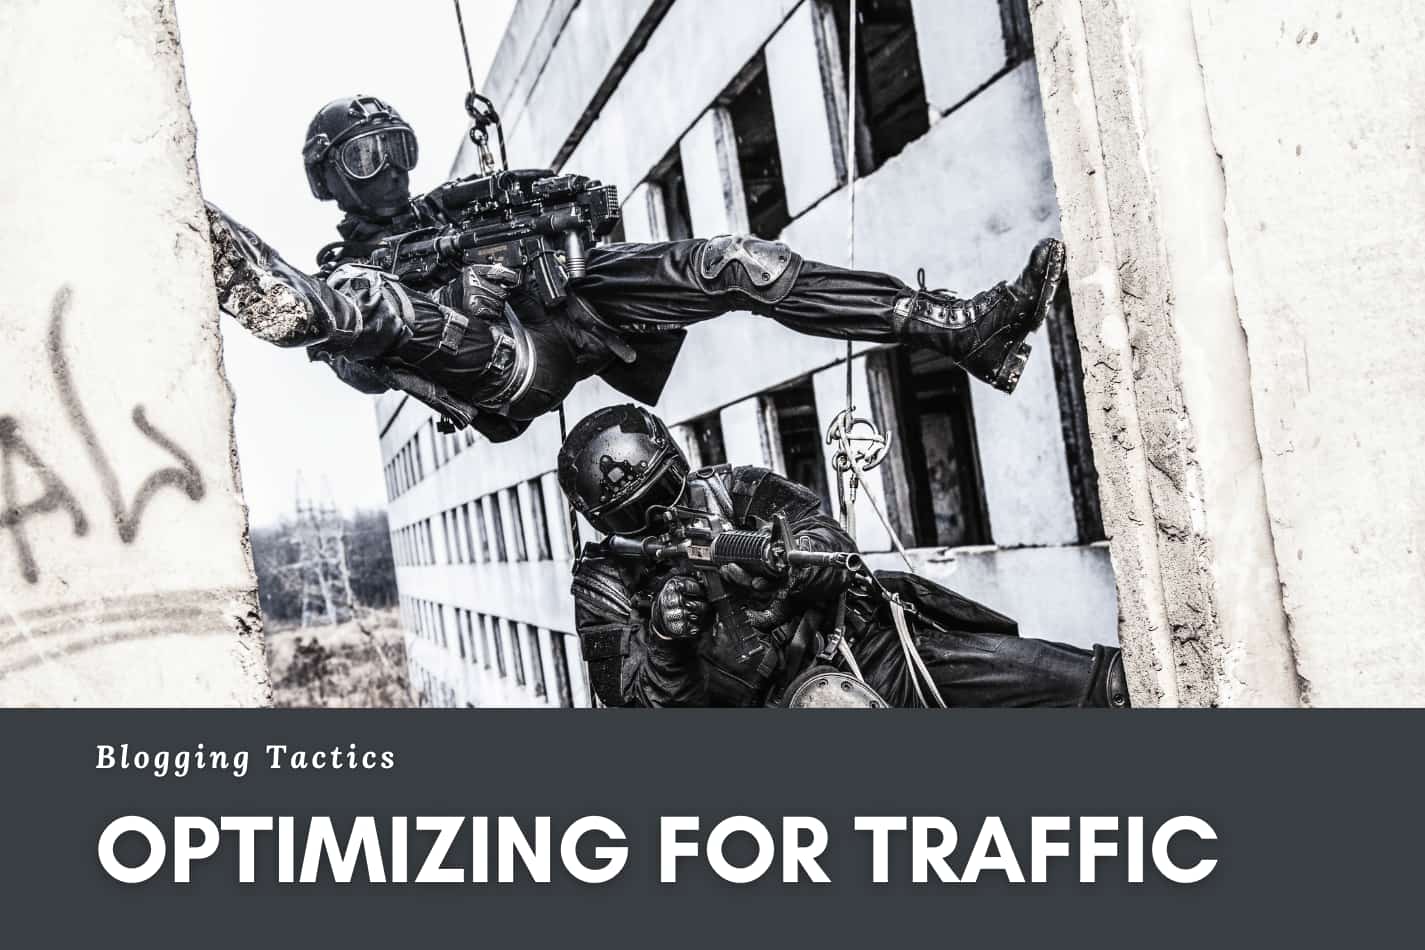 2 SWAT dropping in to maximize performance and impact results - maximize your blog content